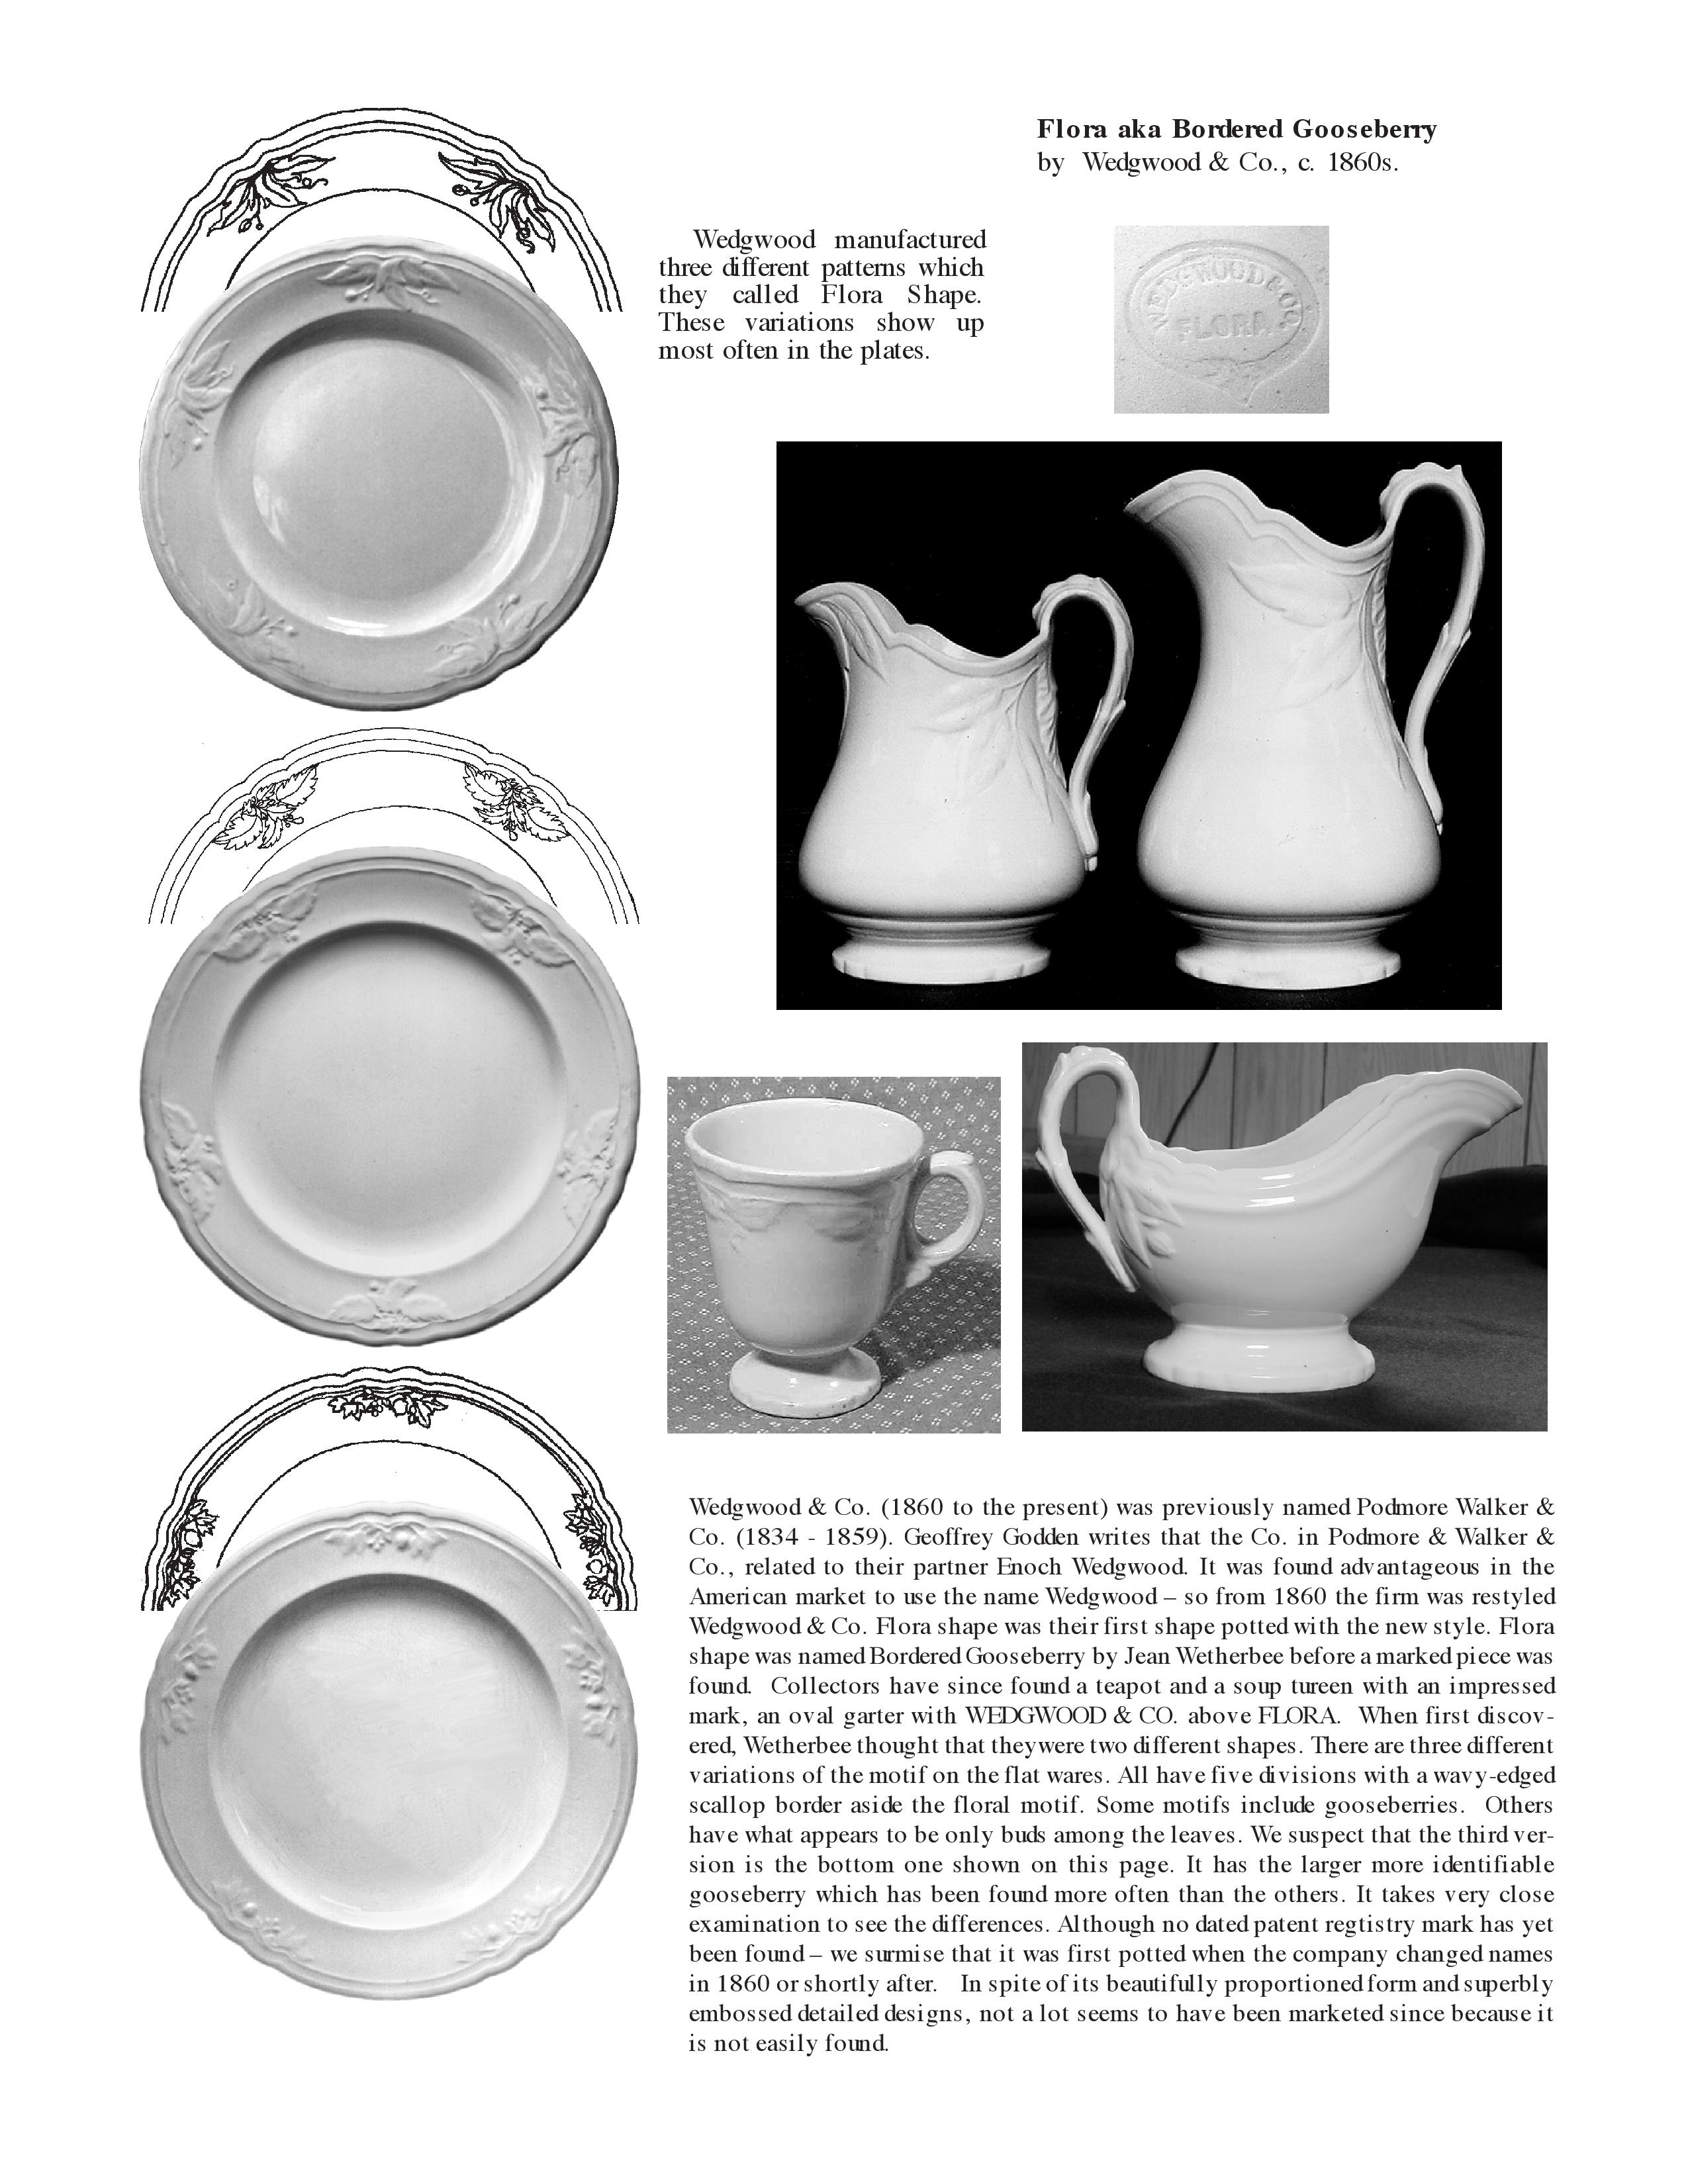 Flora by Wedgwood profile_Flora profile-page-001-300dpi.jpg